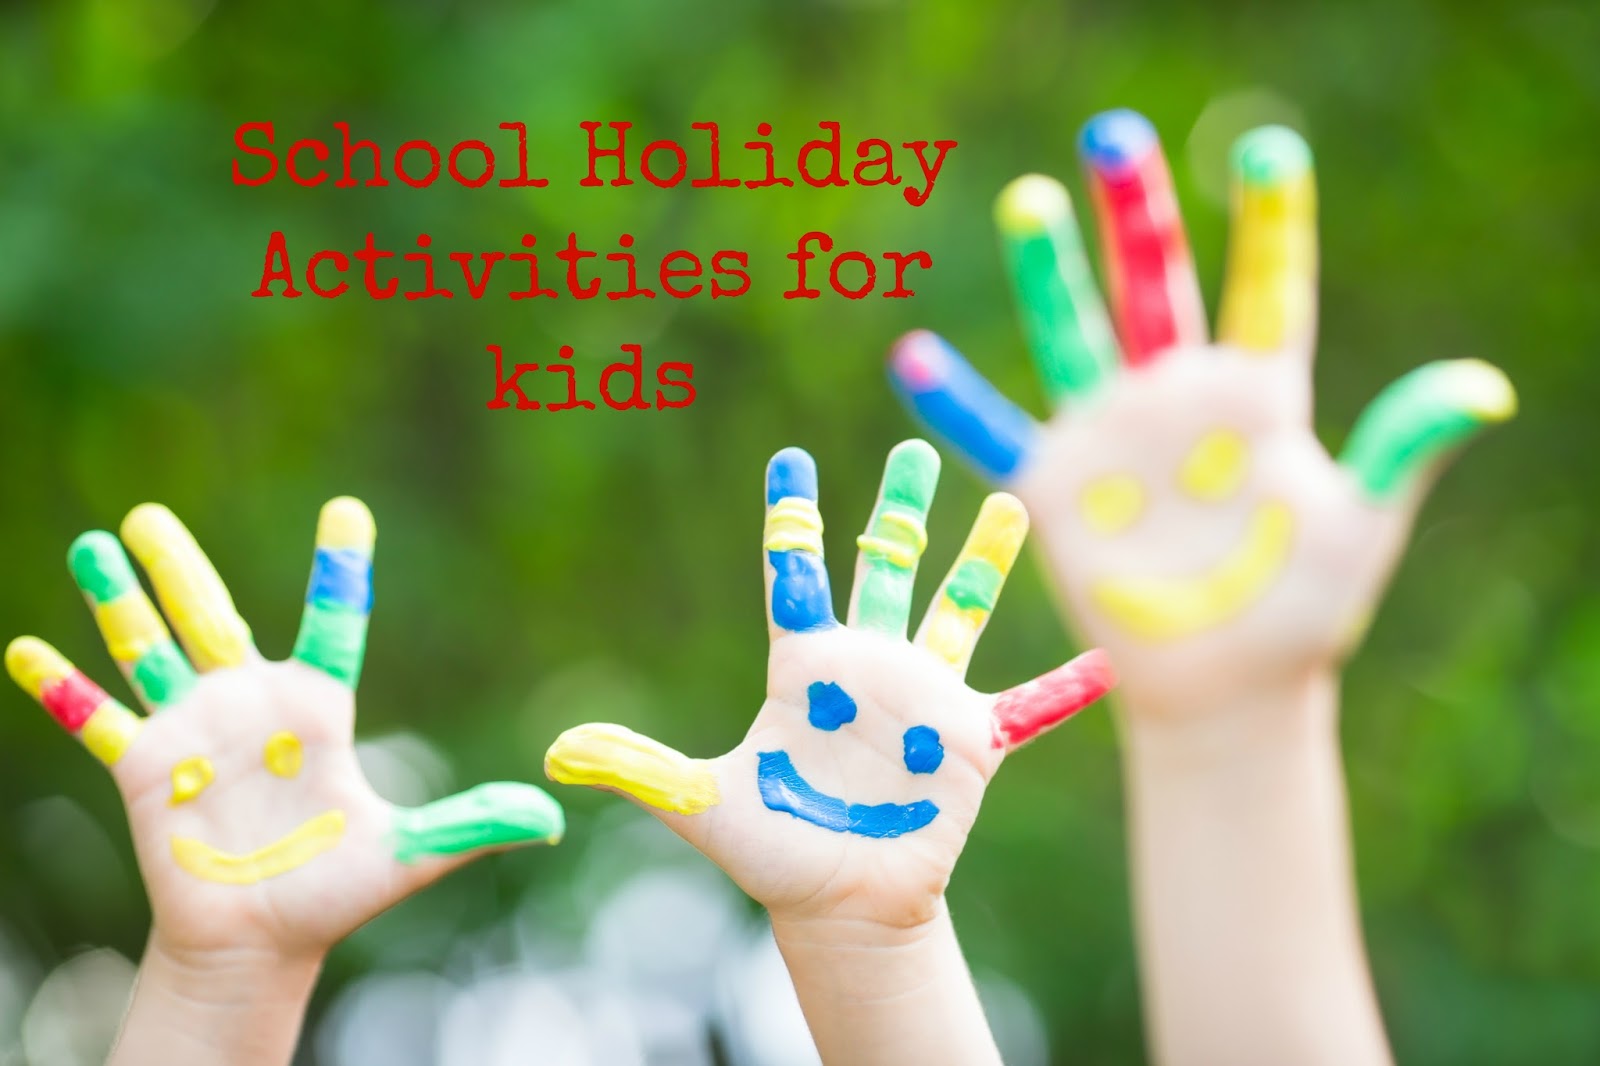 March school holiday activities for kids Singapore 2016 